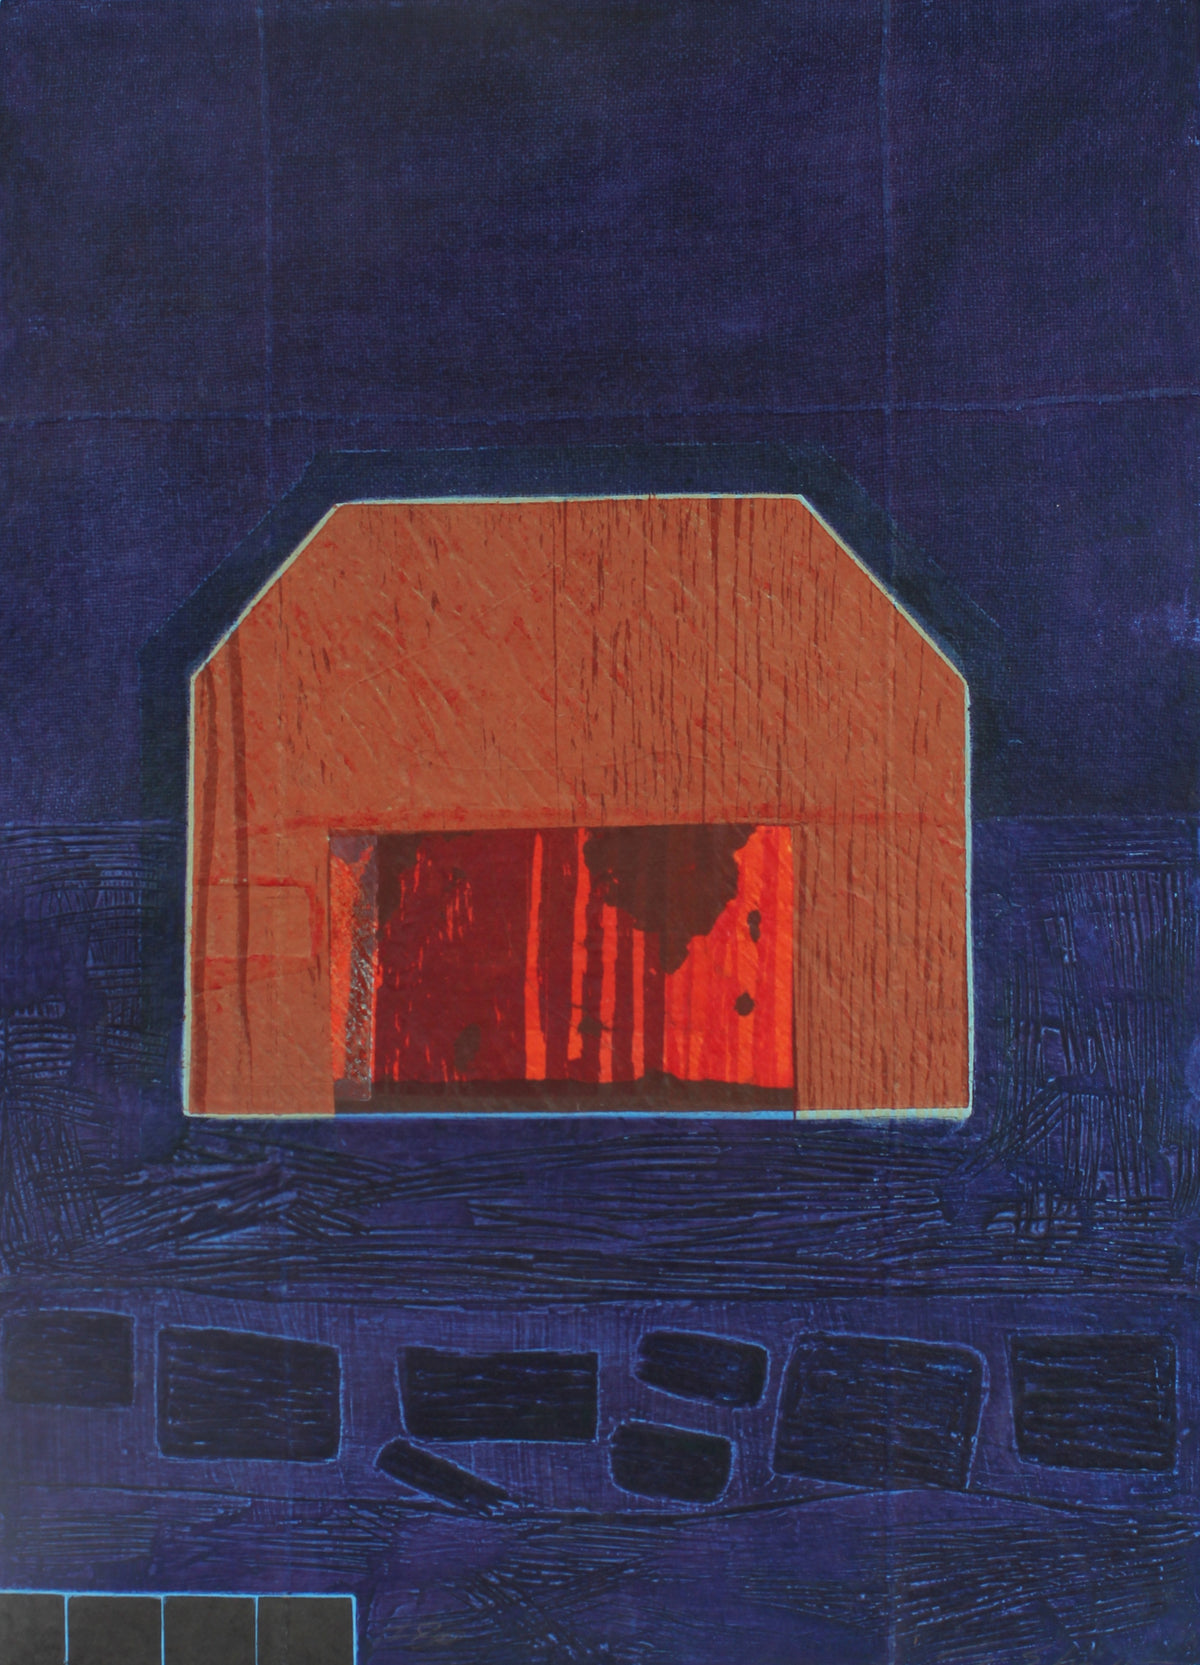 Abstracted Image of a House &lt;br&gt;1984-1988 Collograph on Handmade Paper with String &lt;br&gt;&lt;br&gt;#93463